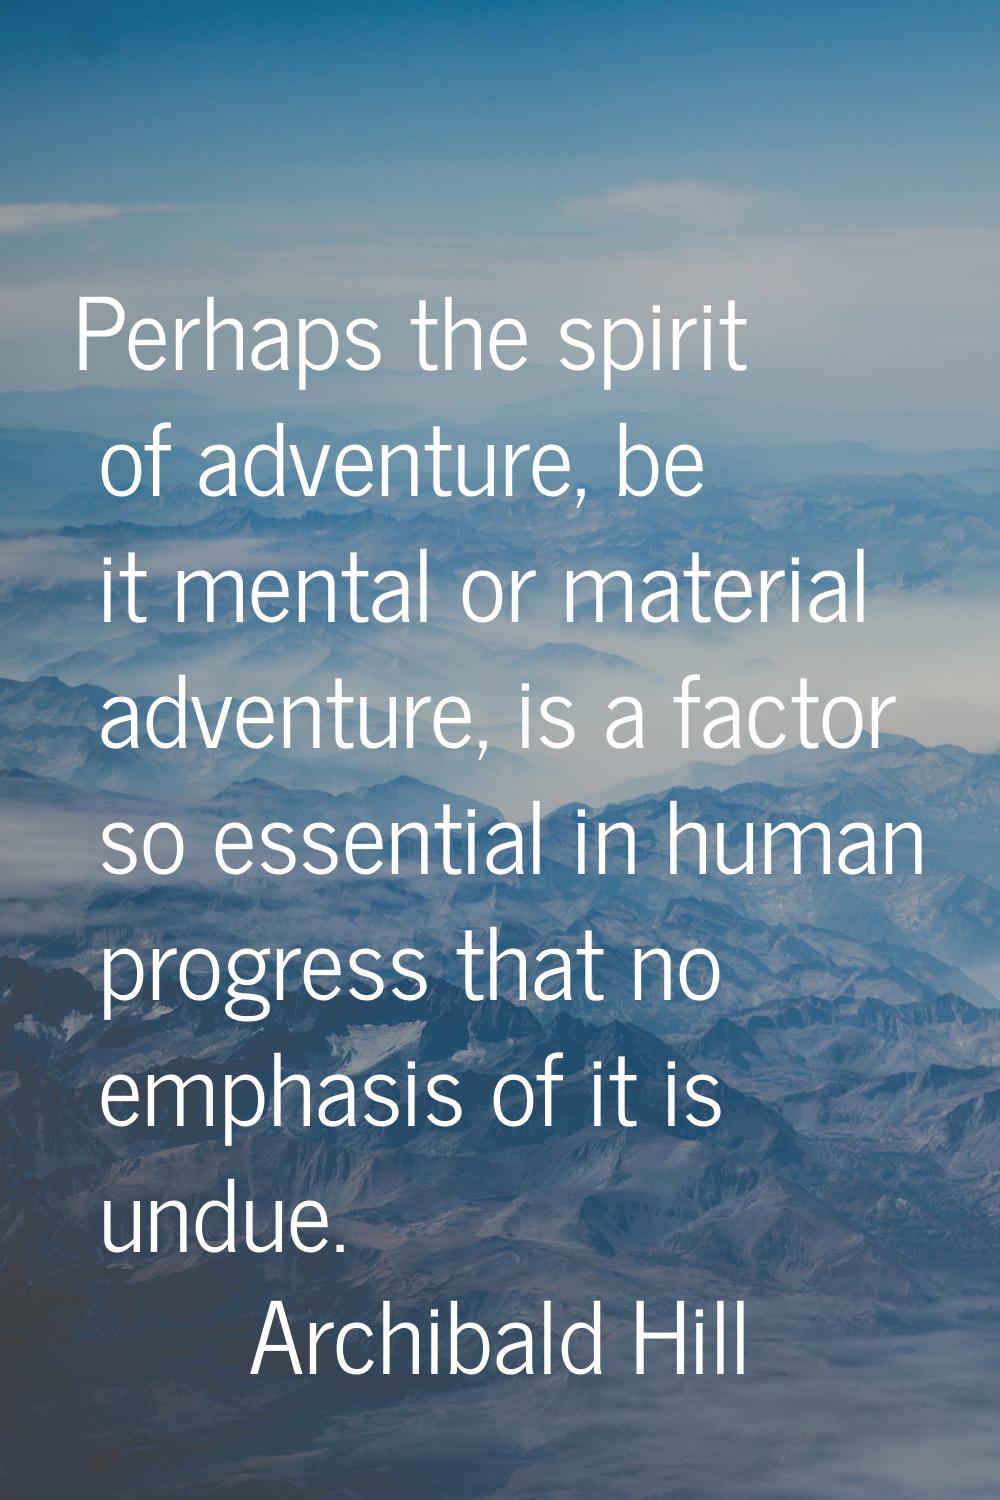 Perhaps the spirit of adventure, be it mental or material adventure, is a factor so essential in hu